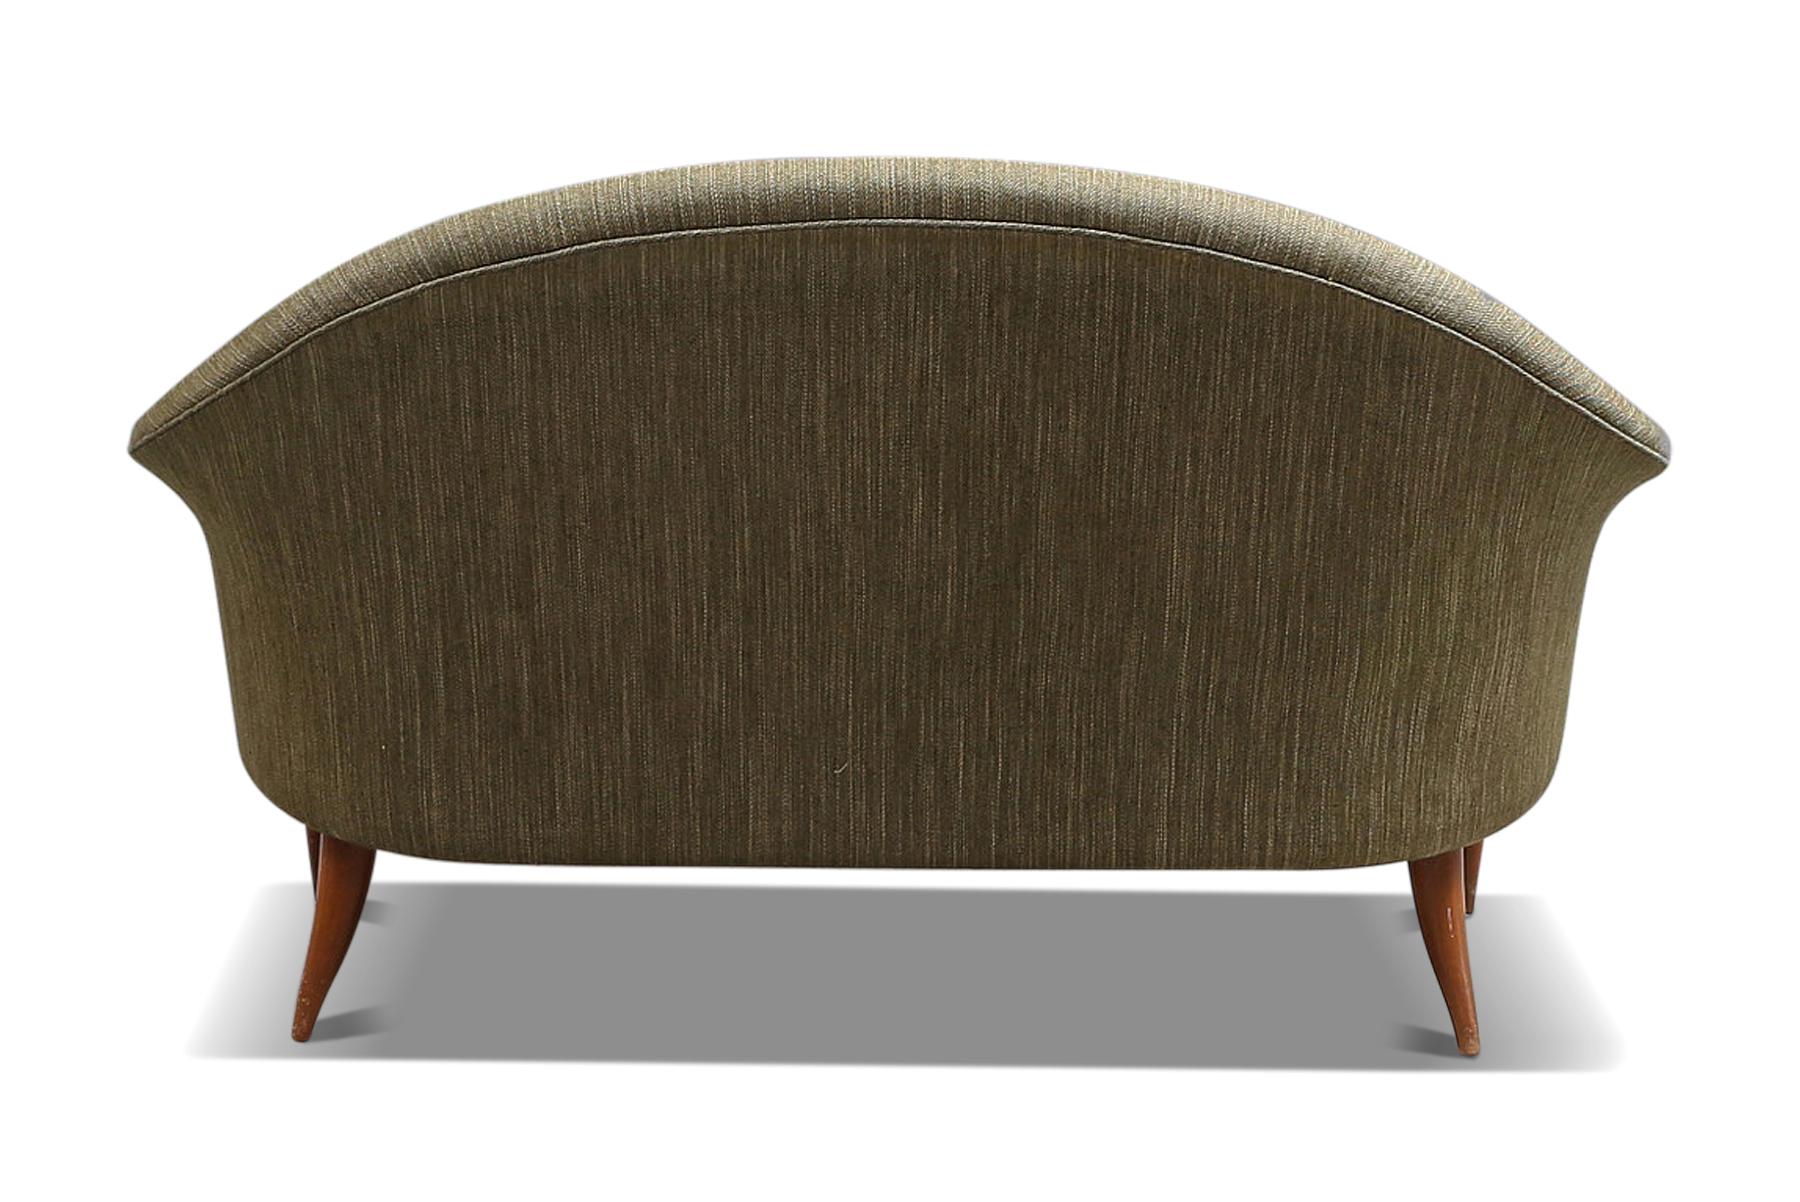 Other “Paradiset” Sofa by Kerstin Hörlin-Holmquist For Sale